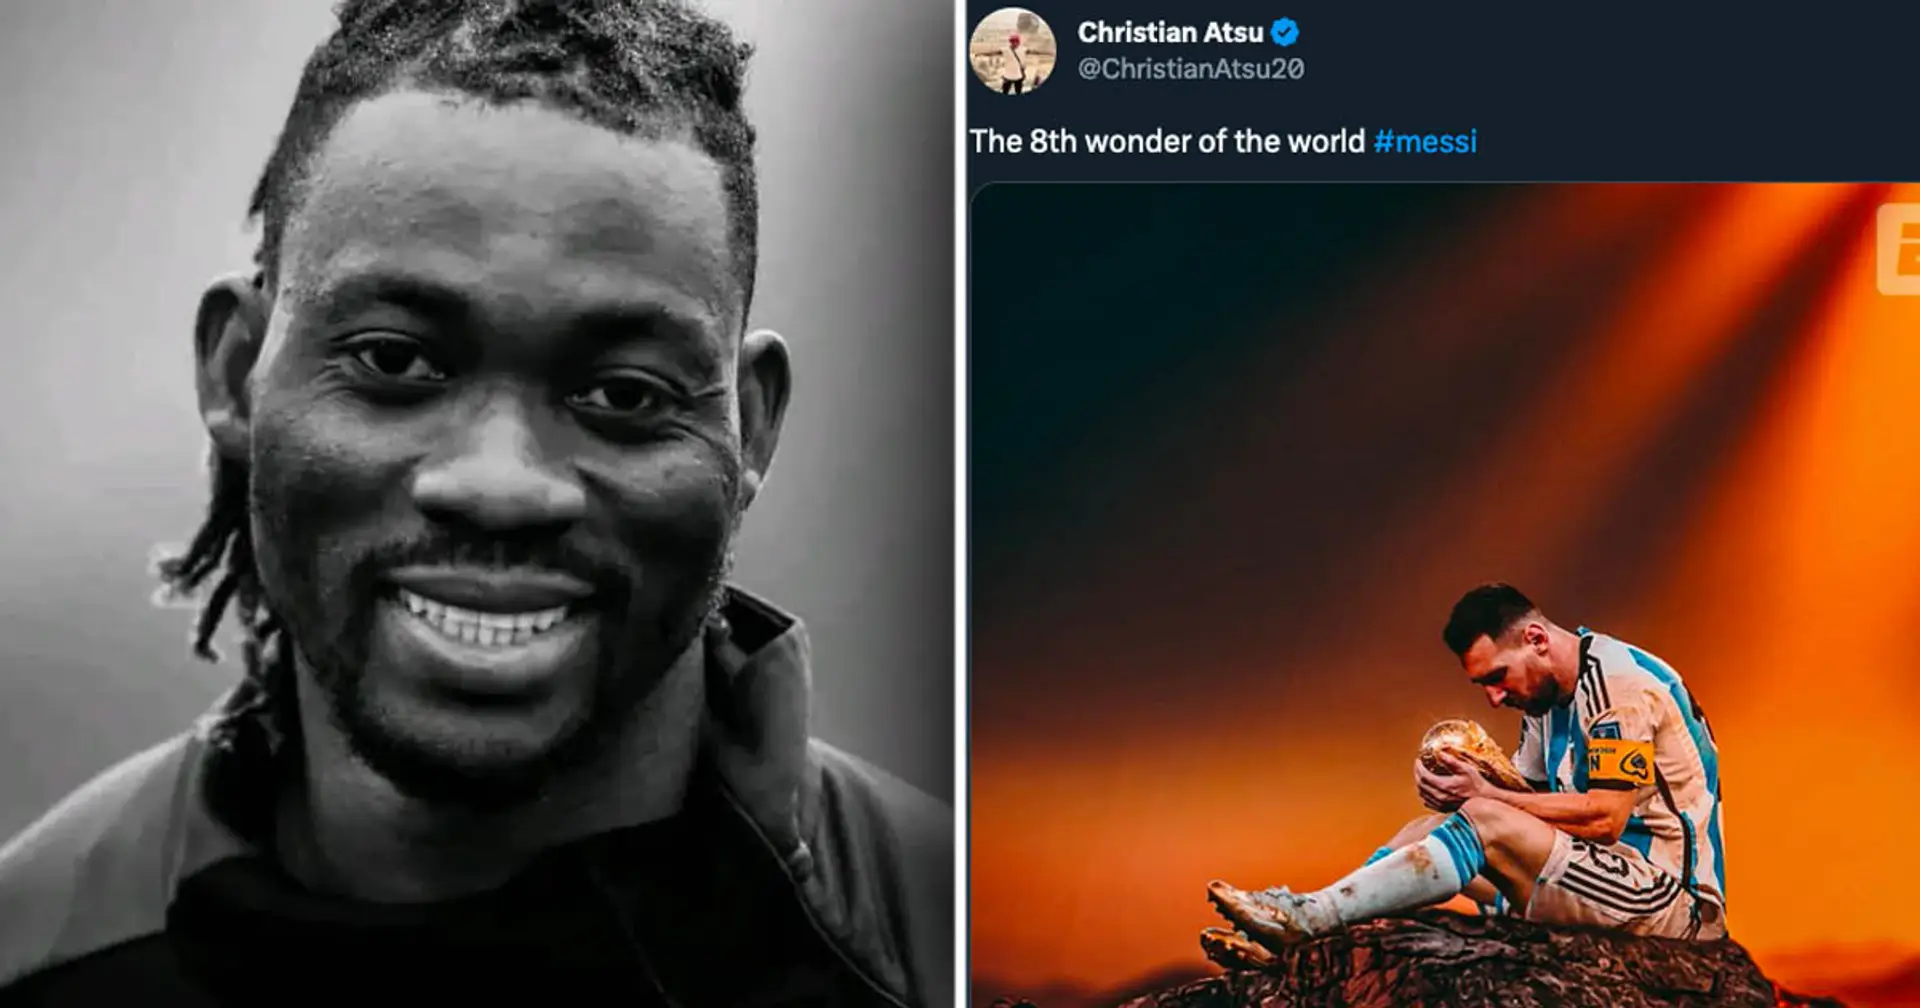 Christian Atsu found dead in Turkey earthquake. He called Messi '8th wonder of the world'